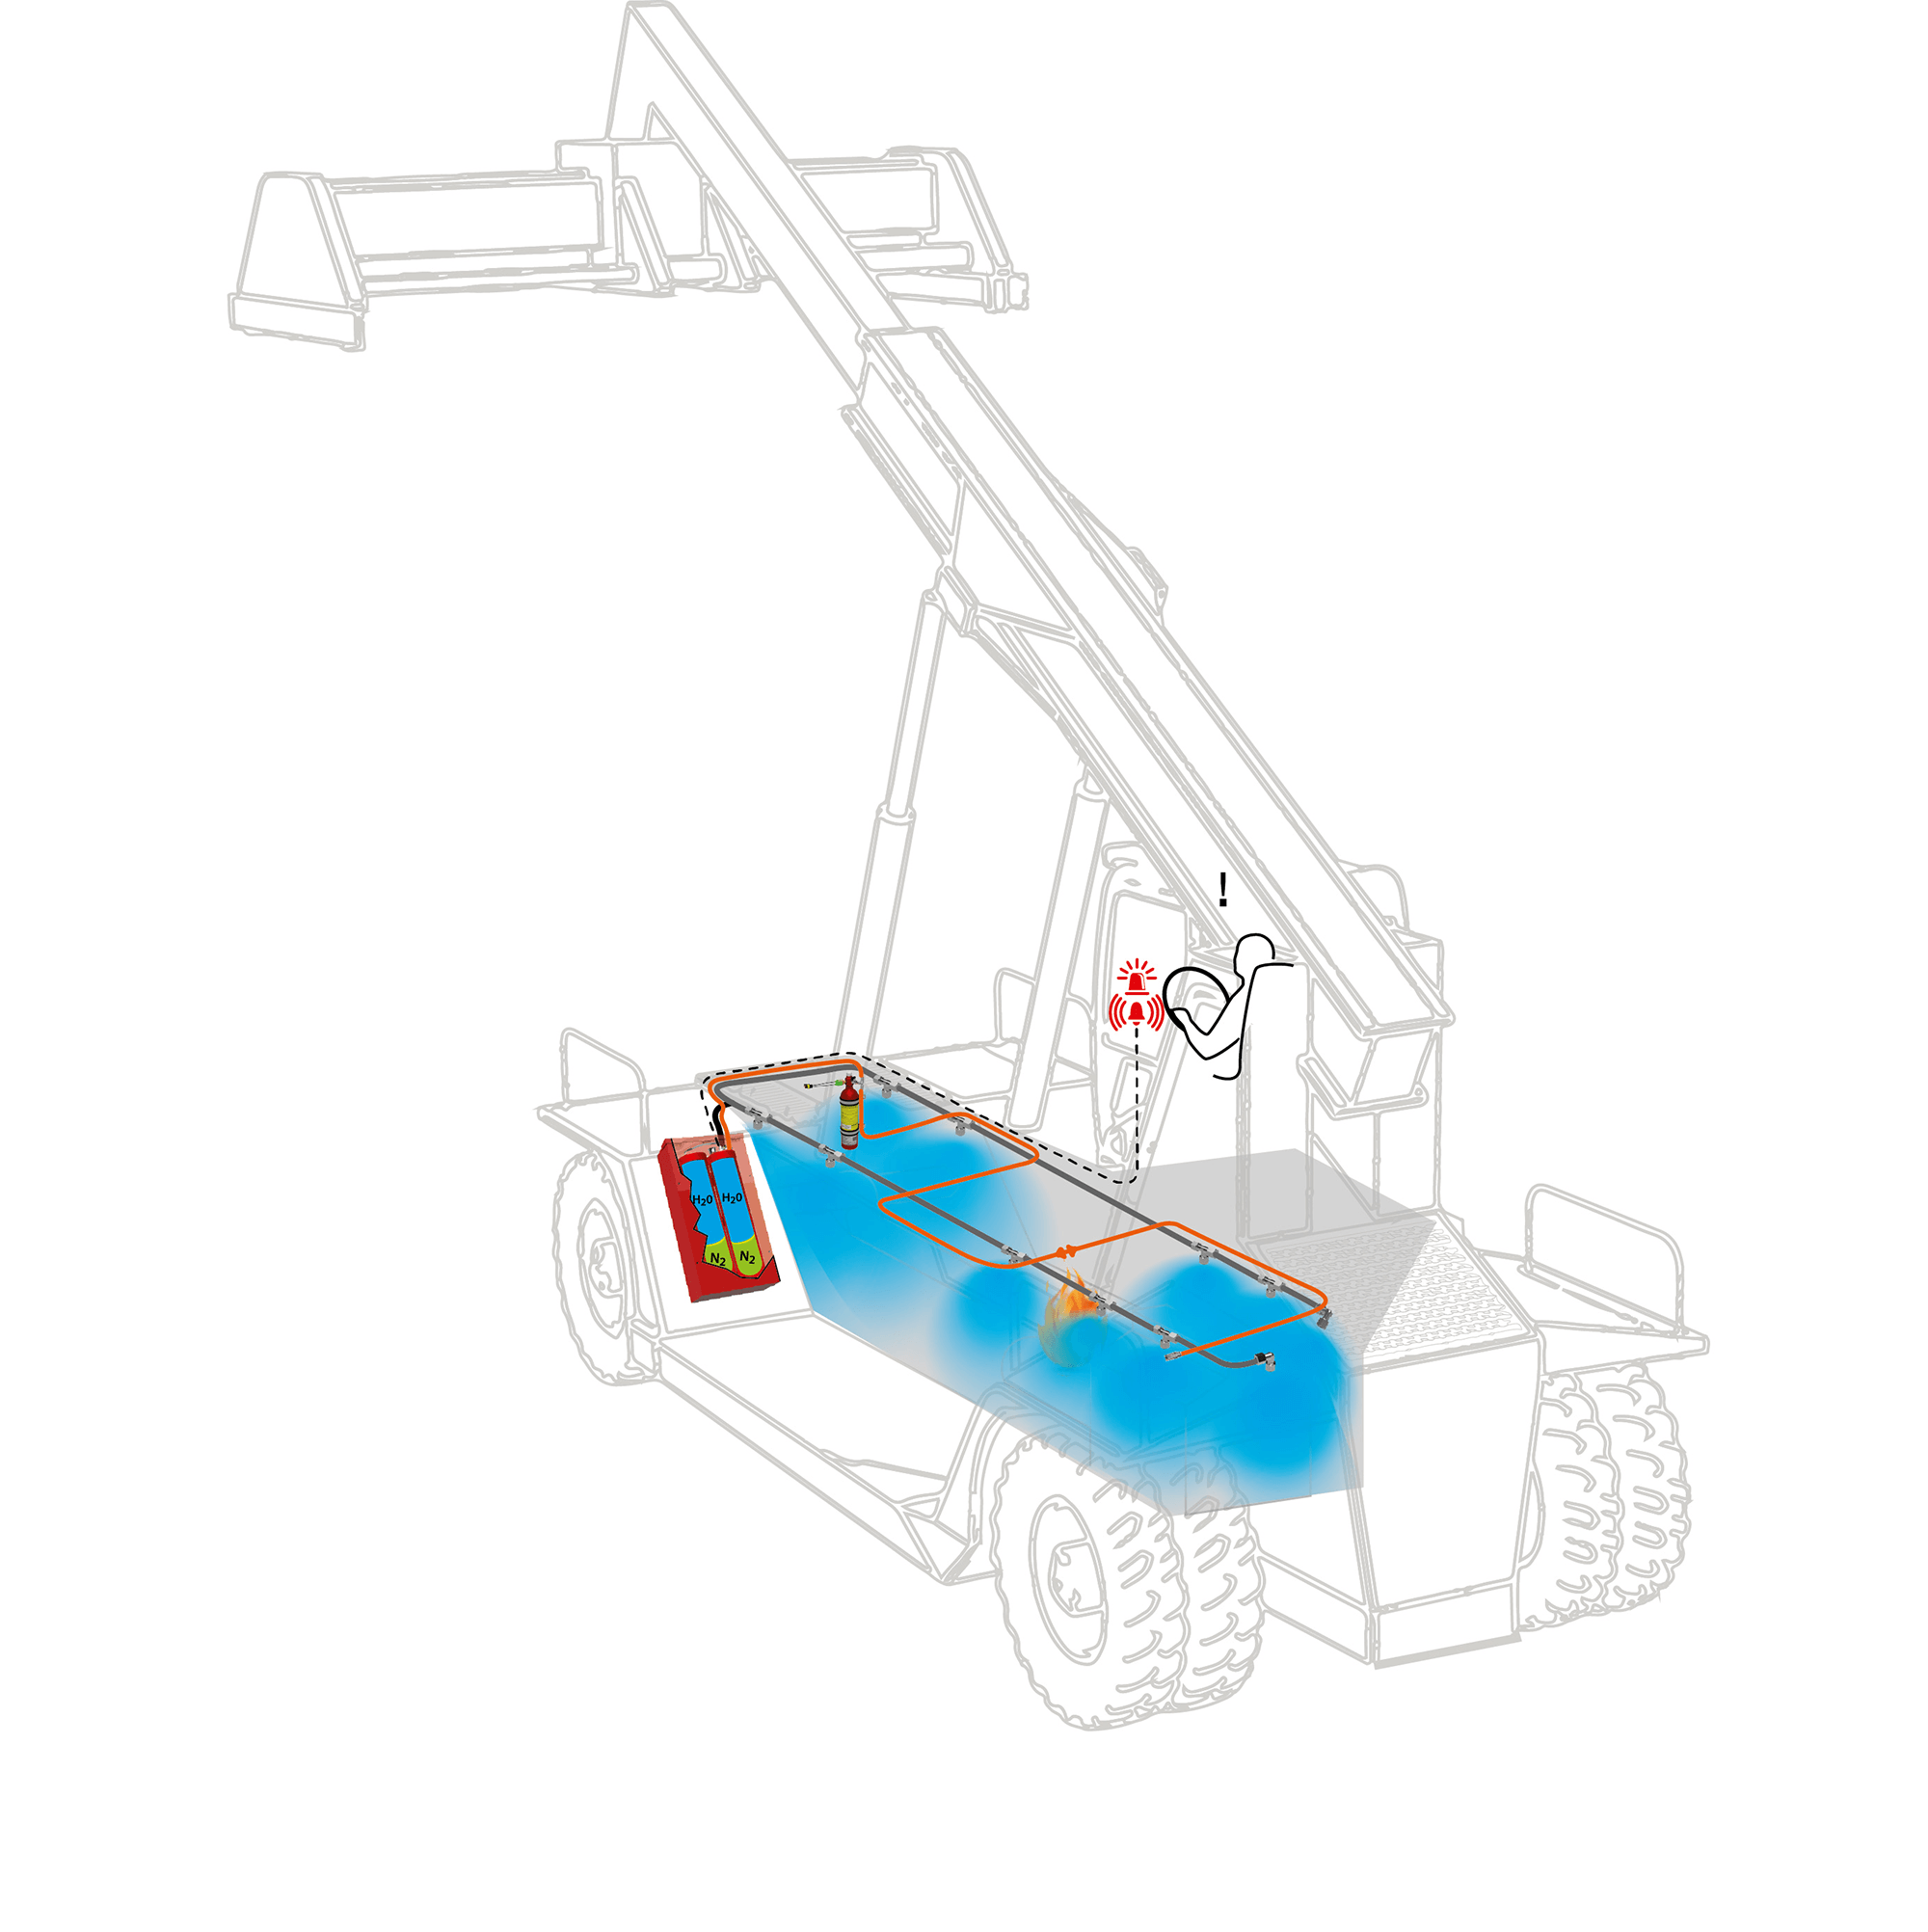 Fire suppression system for Material handling vehicles